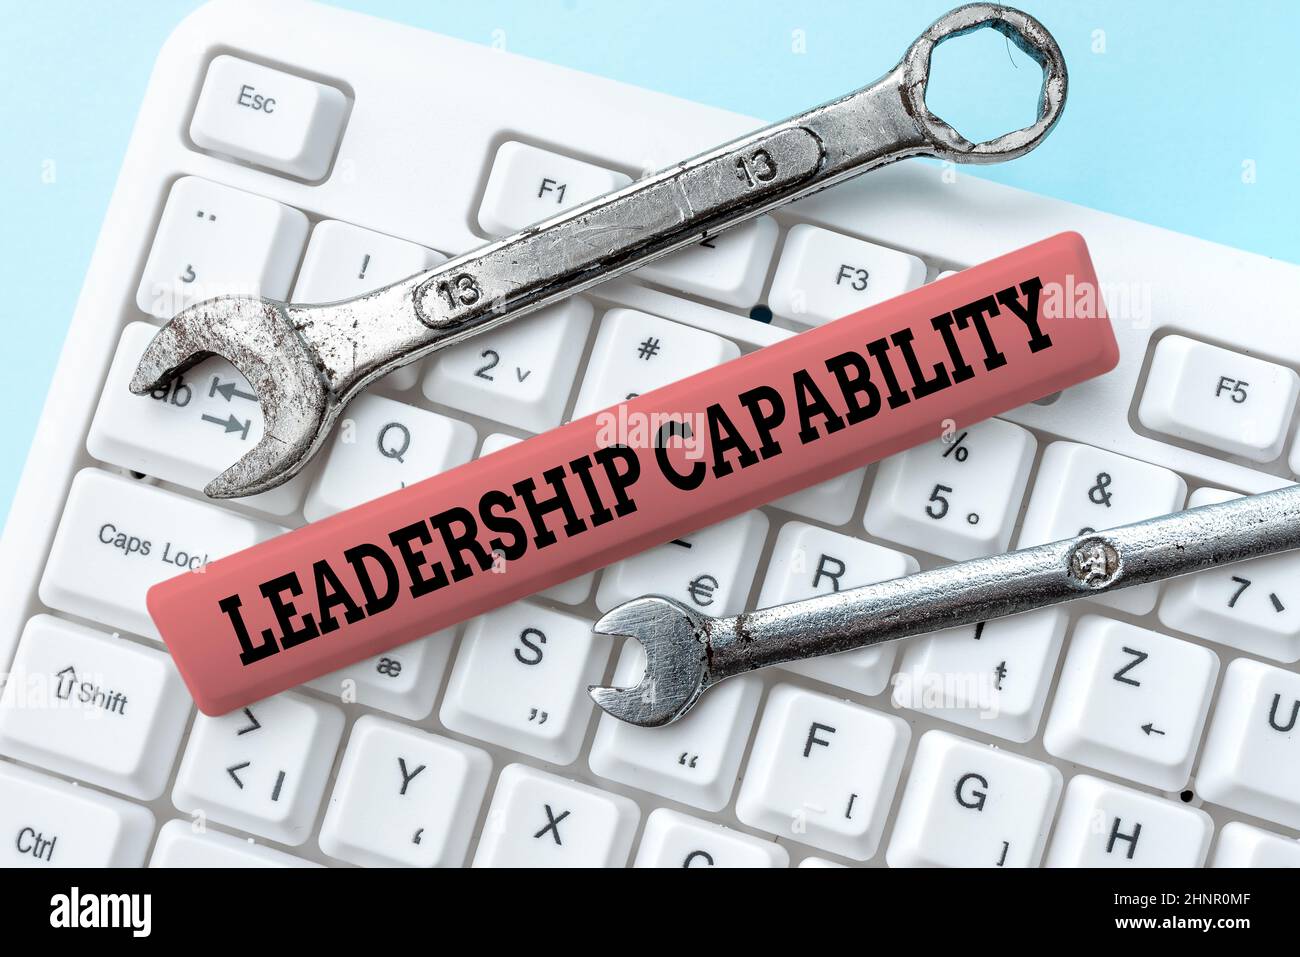 Text showing inspiration Leadership Capability. Business overview what a Leader can build Capacity to Lead Effectively Downloading Online Files And Data, Uploading Programming Codes Stock Photo